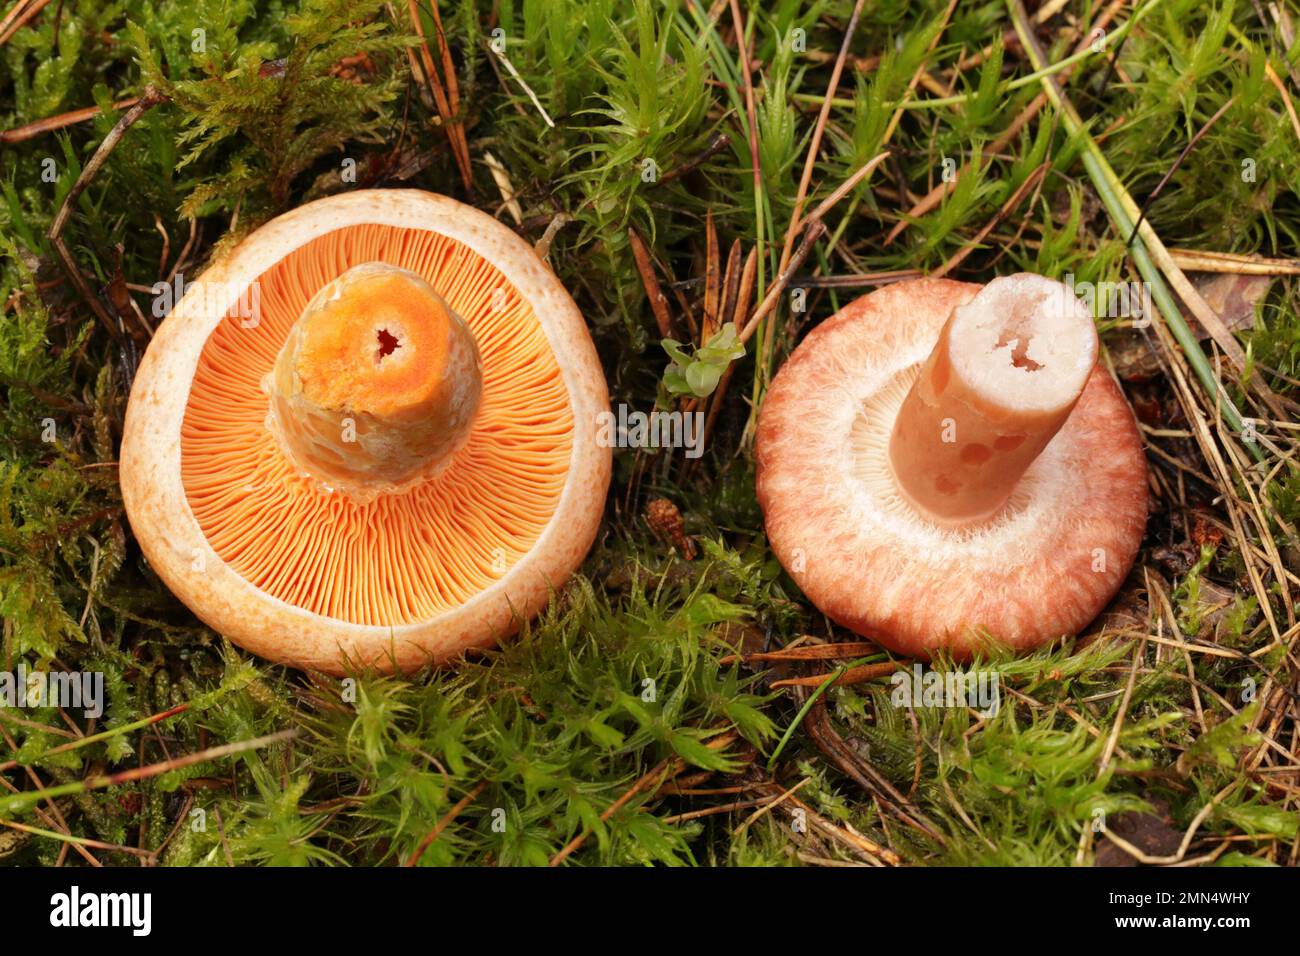 Comparison of mushrooms, which from above are easy to confuse. On the left is edible mushroom saffron milk cap and on the right is woolly milkcap. Stock Photo